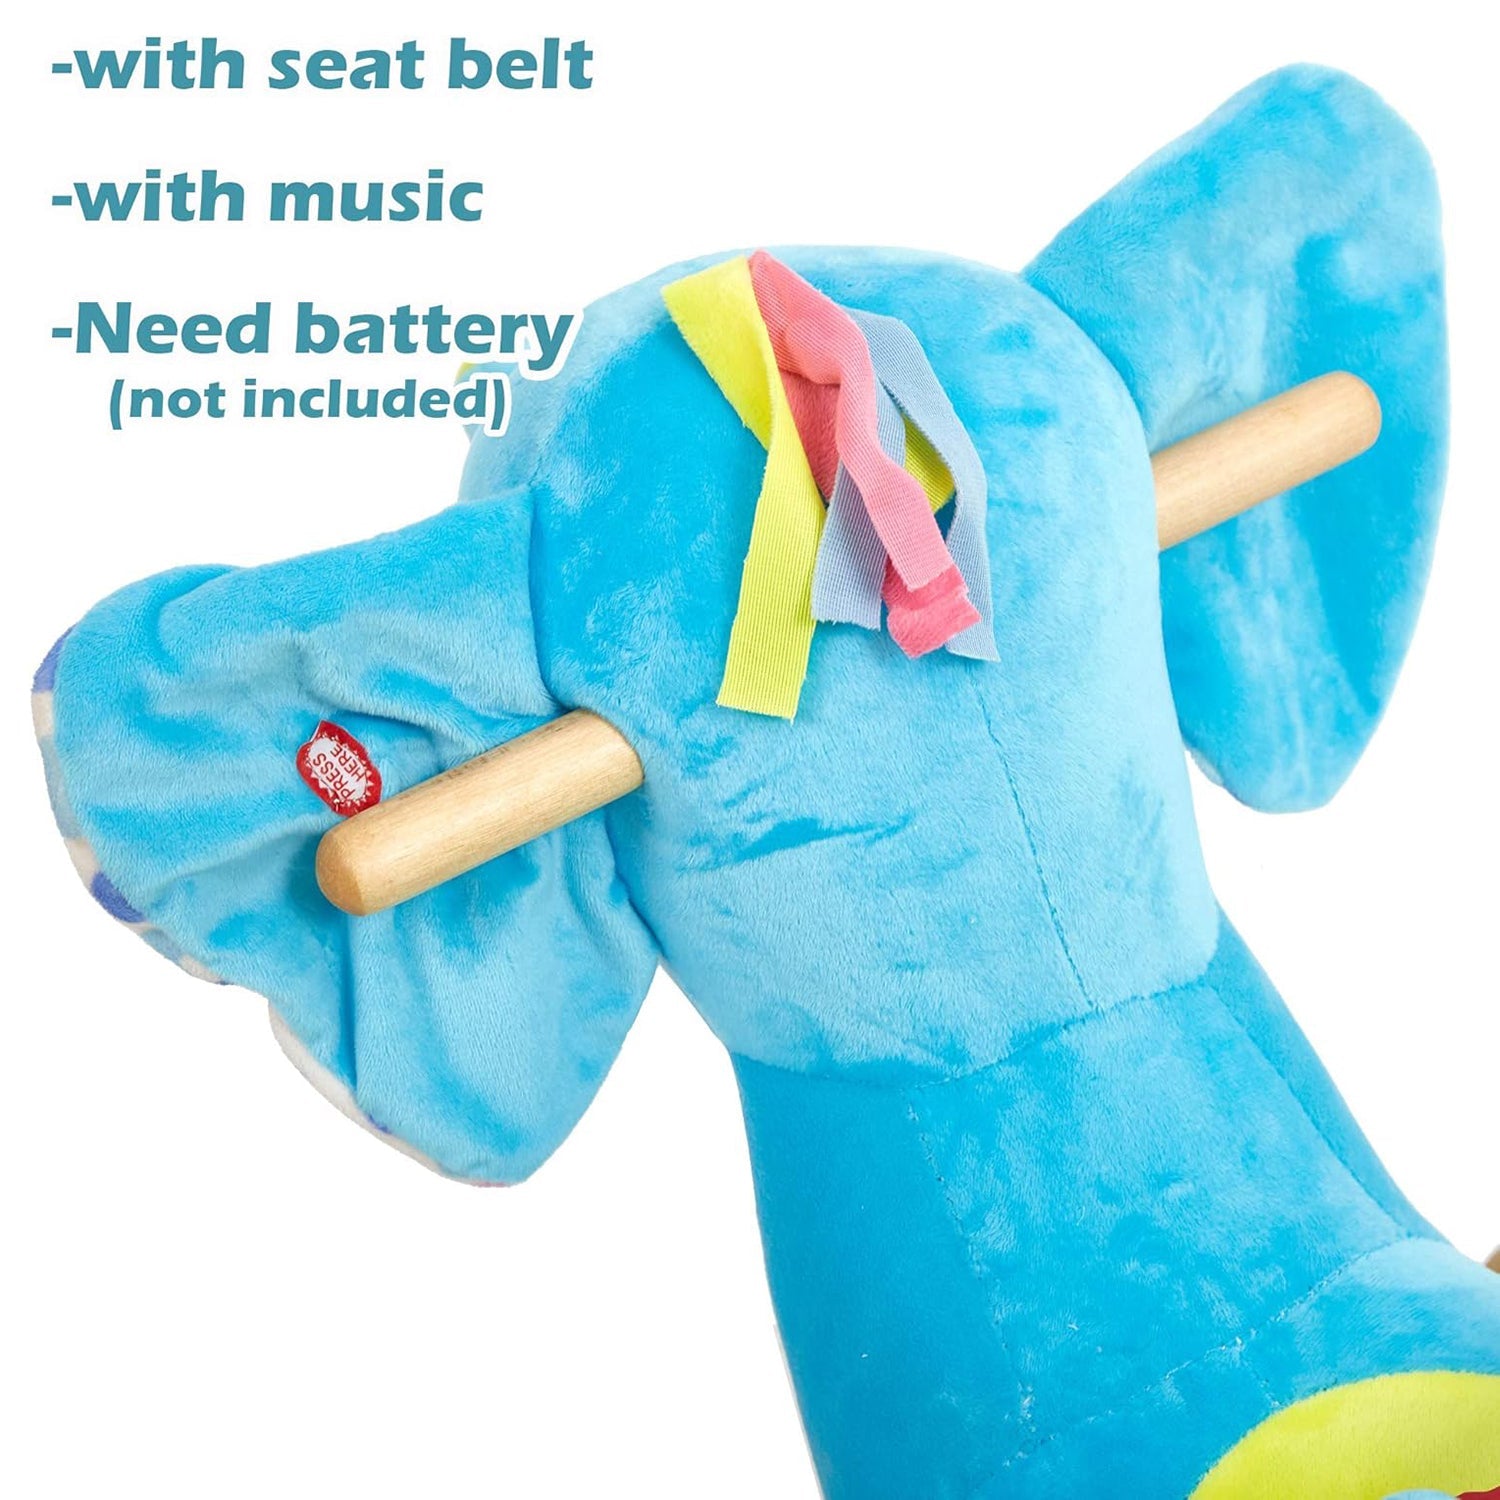 2-in-1 Ride-on Wooden Plush Rocking Horse Chair with Music for Baby Kids Toddlers, Blue Elephant